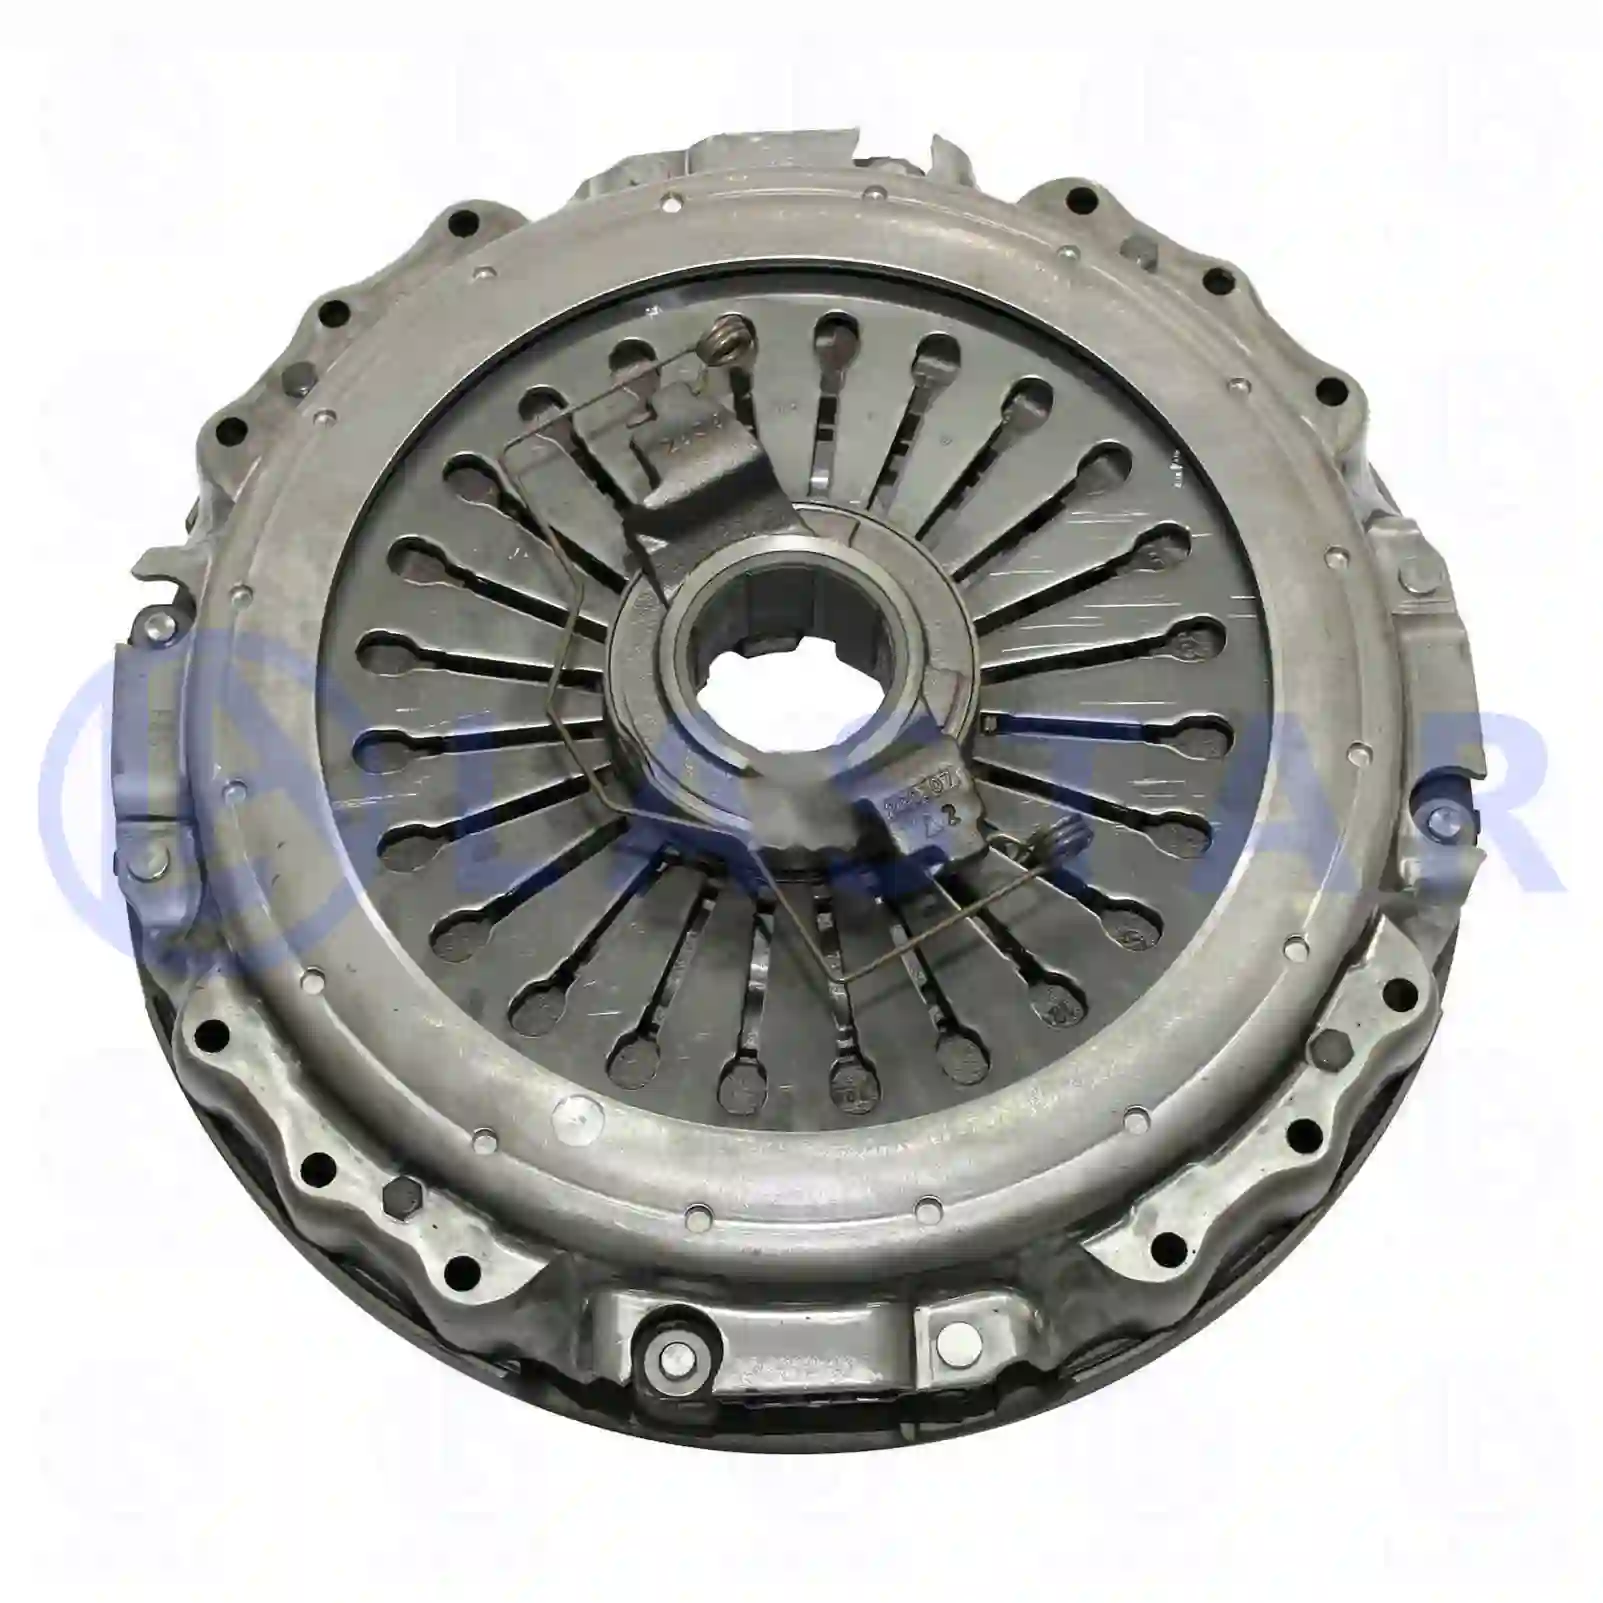 Clutch cover, with release bearing, 77722262, 1521714, 20571923, 3192203, 8113515, 8113946, 8171494 ||  77722262 Lastar Spare Part | Truck Spare Parts, Auotomotive Spare Parts Clutch cover, with release bearing, 77722262, 1521714, 20571923, 3192203, 8113515, 8113946, 8171494 ||  77722262 Lastar Spare Part | Truck Spare Parts, Auotomotive Spare Parts